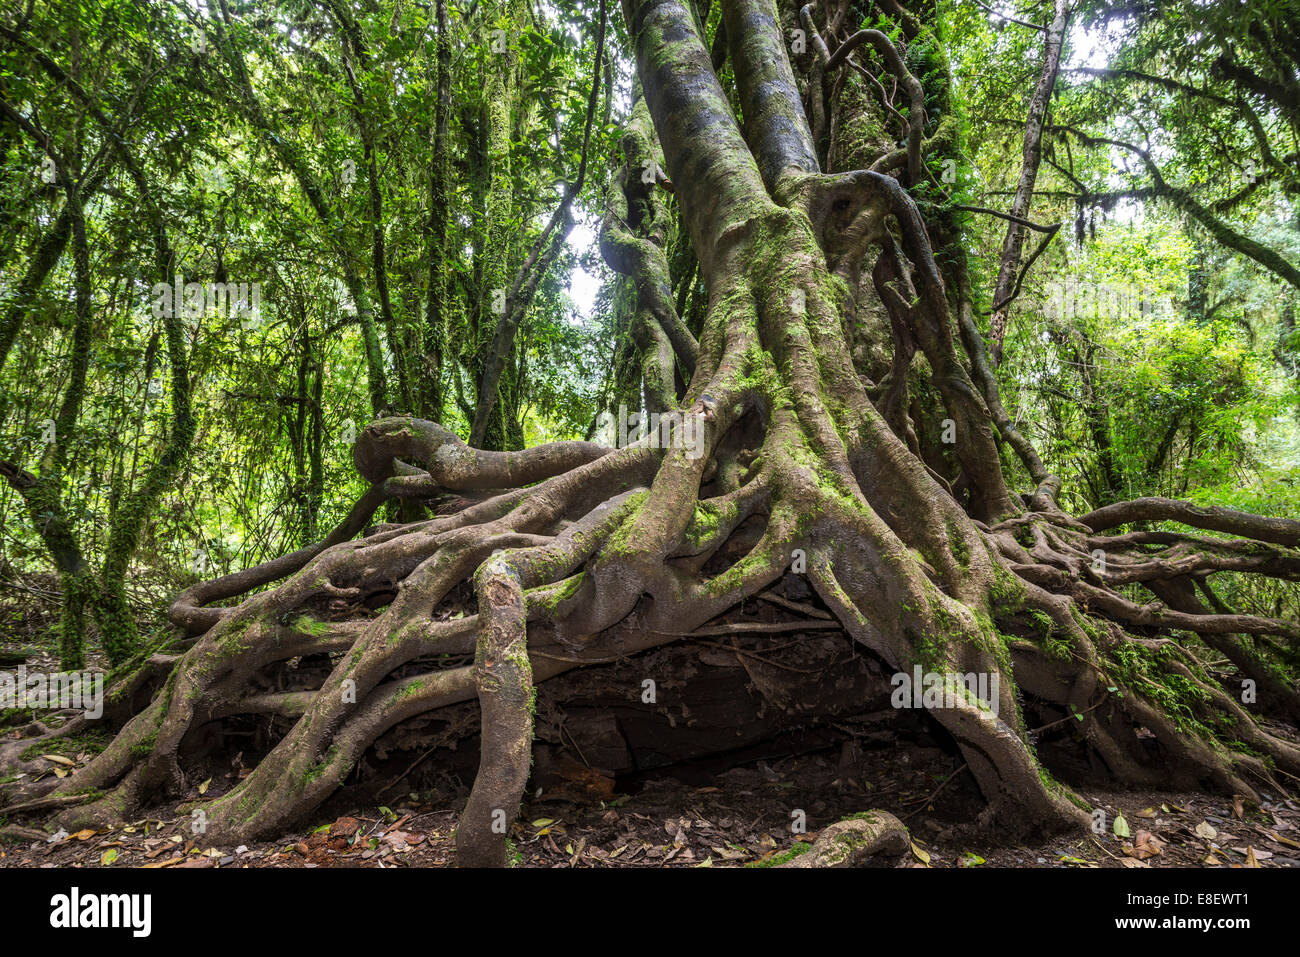 Southern Beech (Nothofagus) with a branched root system, Puyehue National Park, Los Lagos Region, Chile Stock Photo